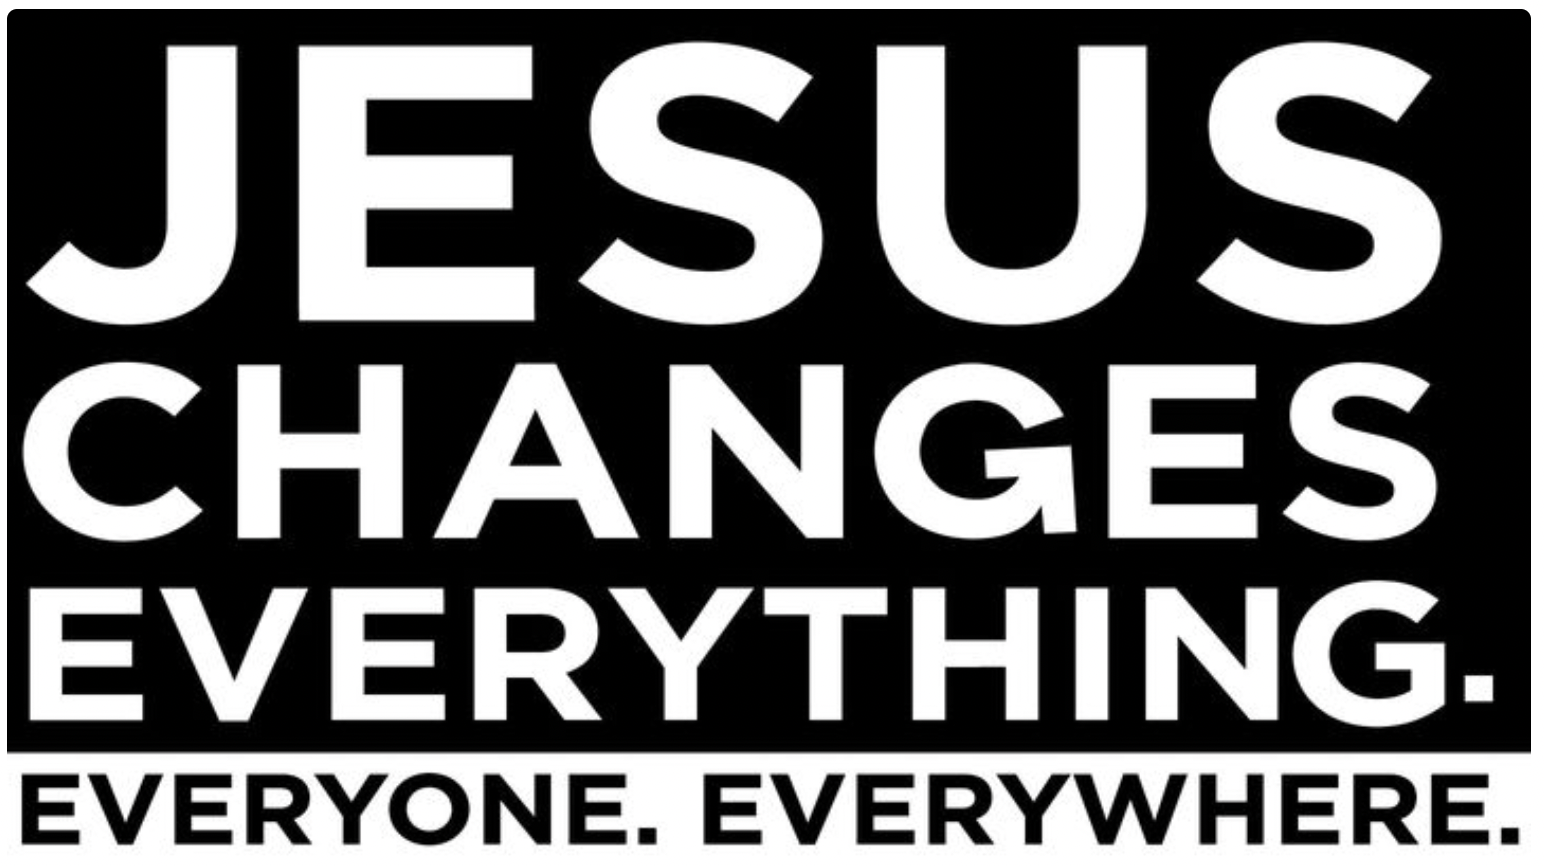 Jesus changes everything